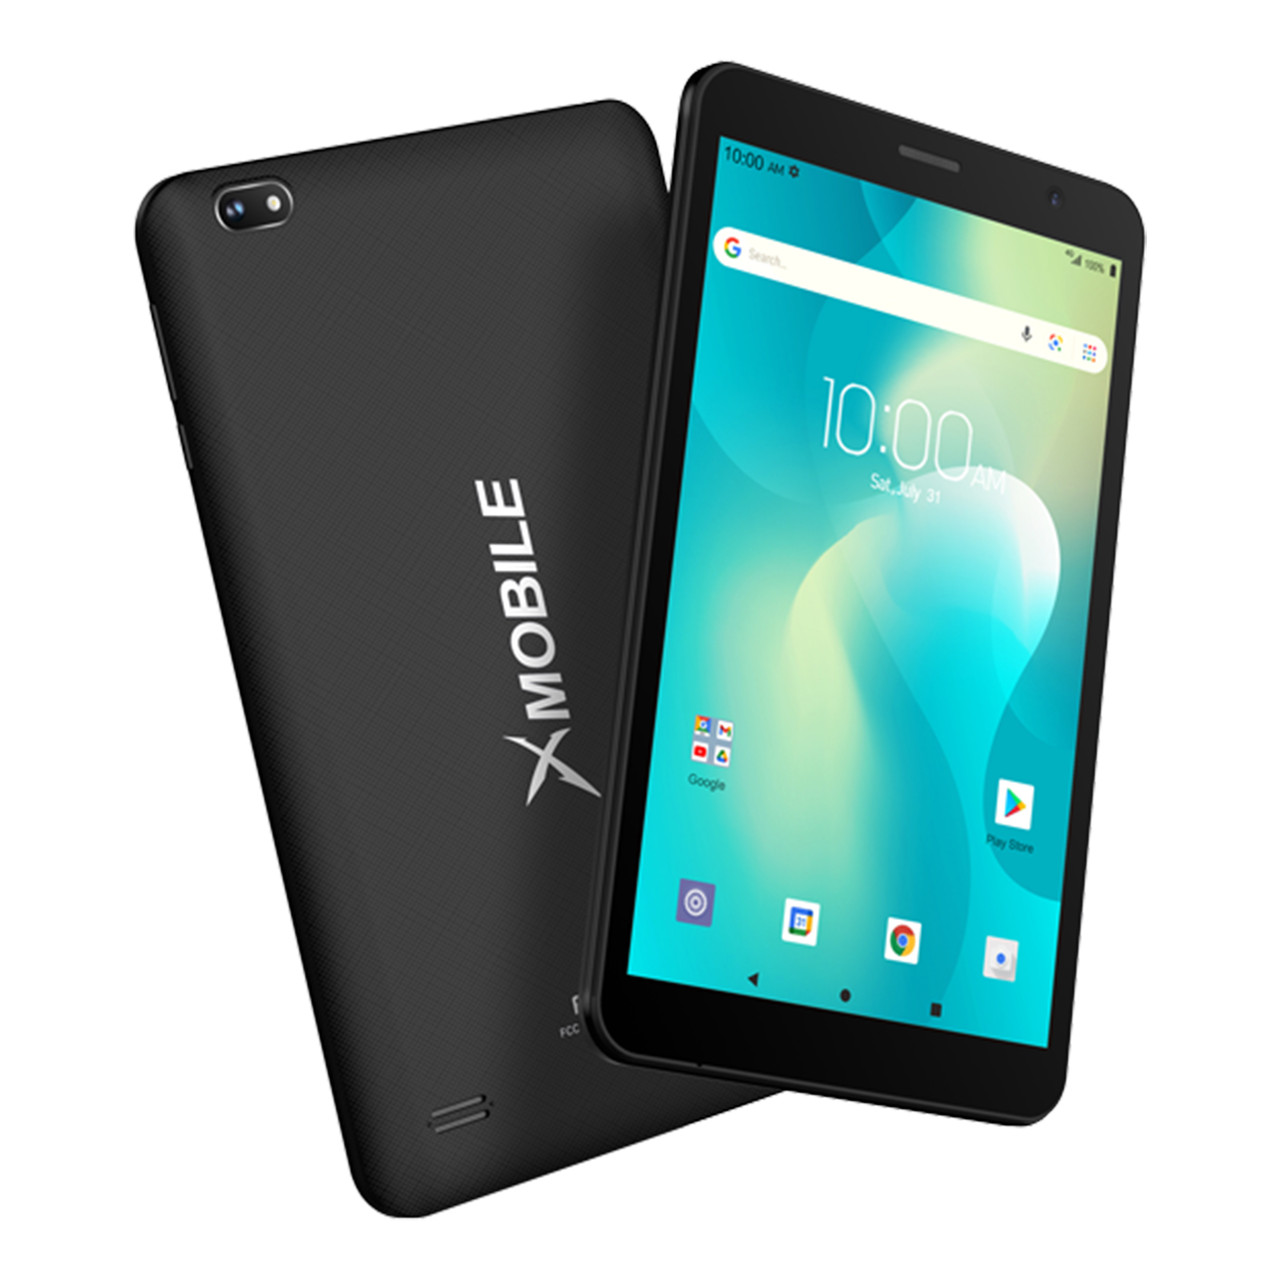 XMOBILE X8 4G LTE,  32GB+3GB, 5MP, 8" Tablet  with Case  Unlocked  Grey - *In Store